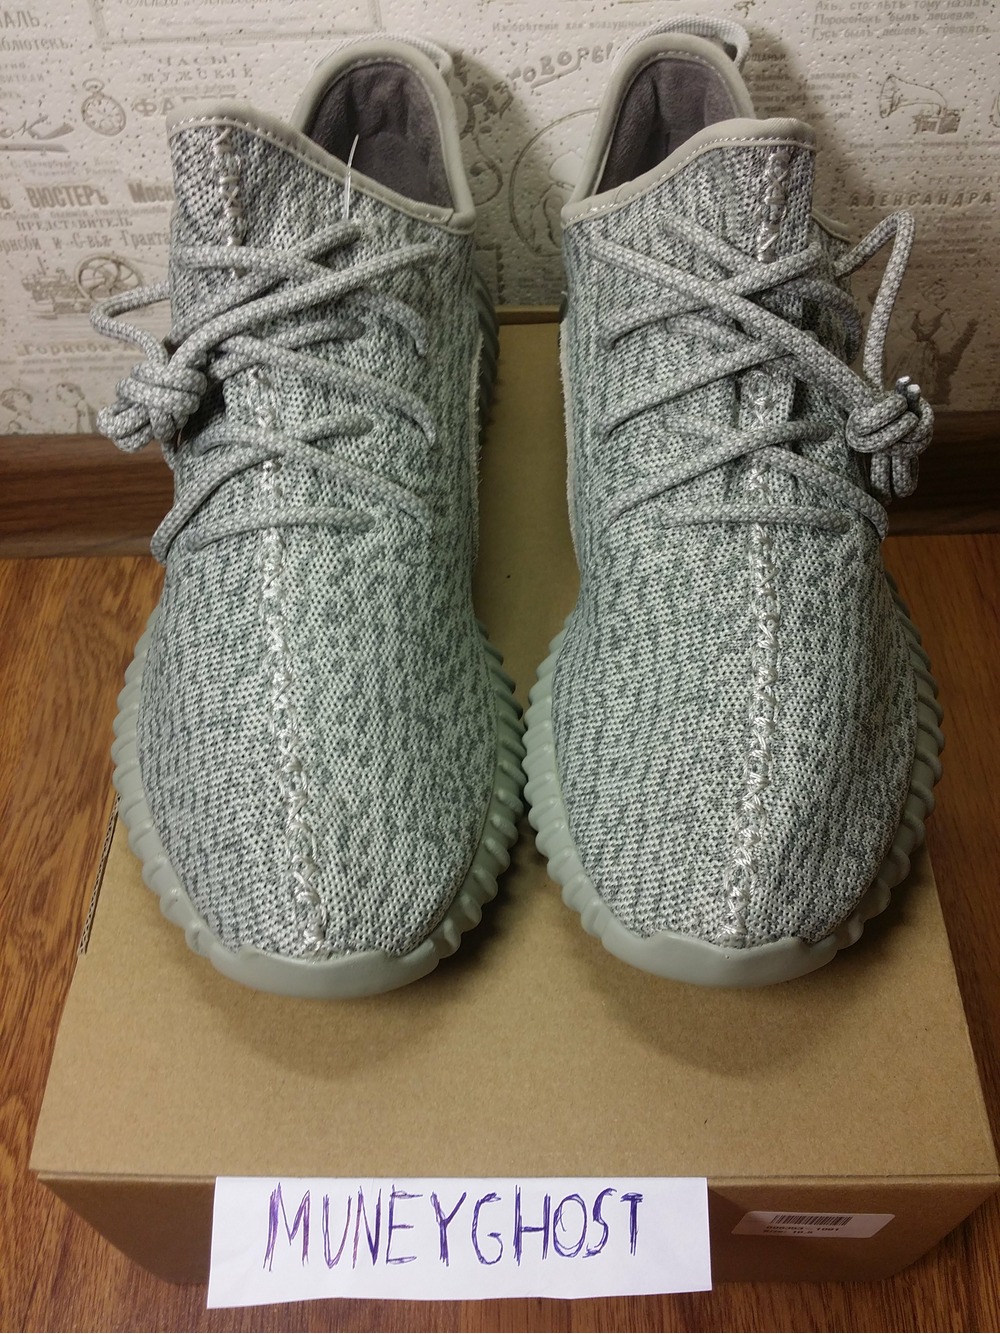 Where to Cop the adidas Yeezy 350 Boost 'Moonrock' WearTesters